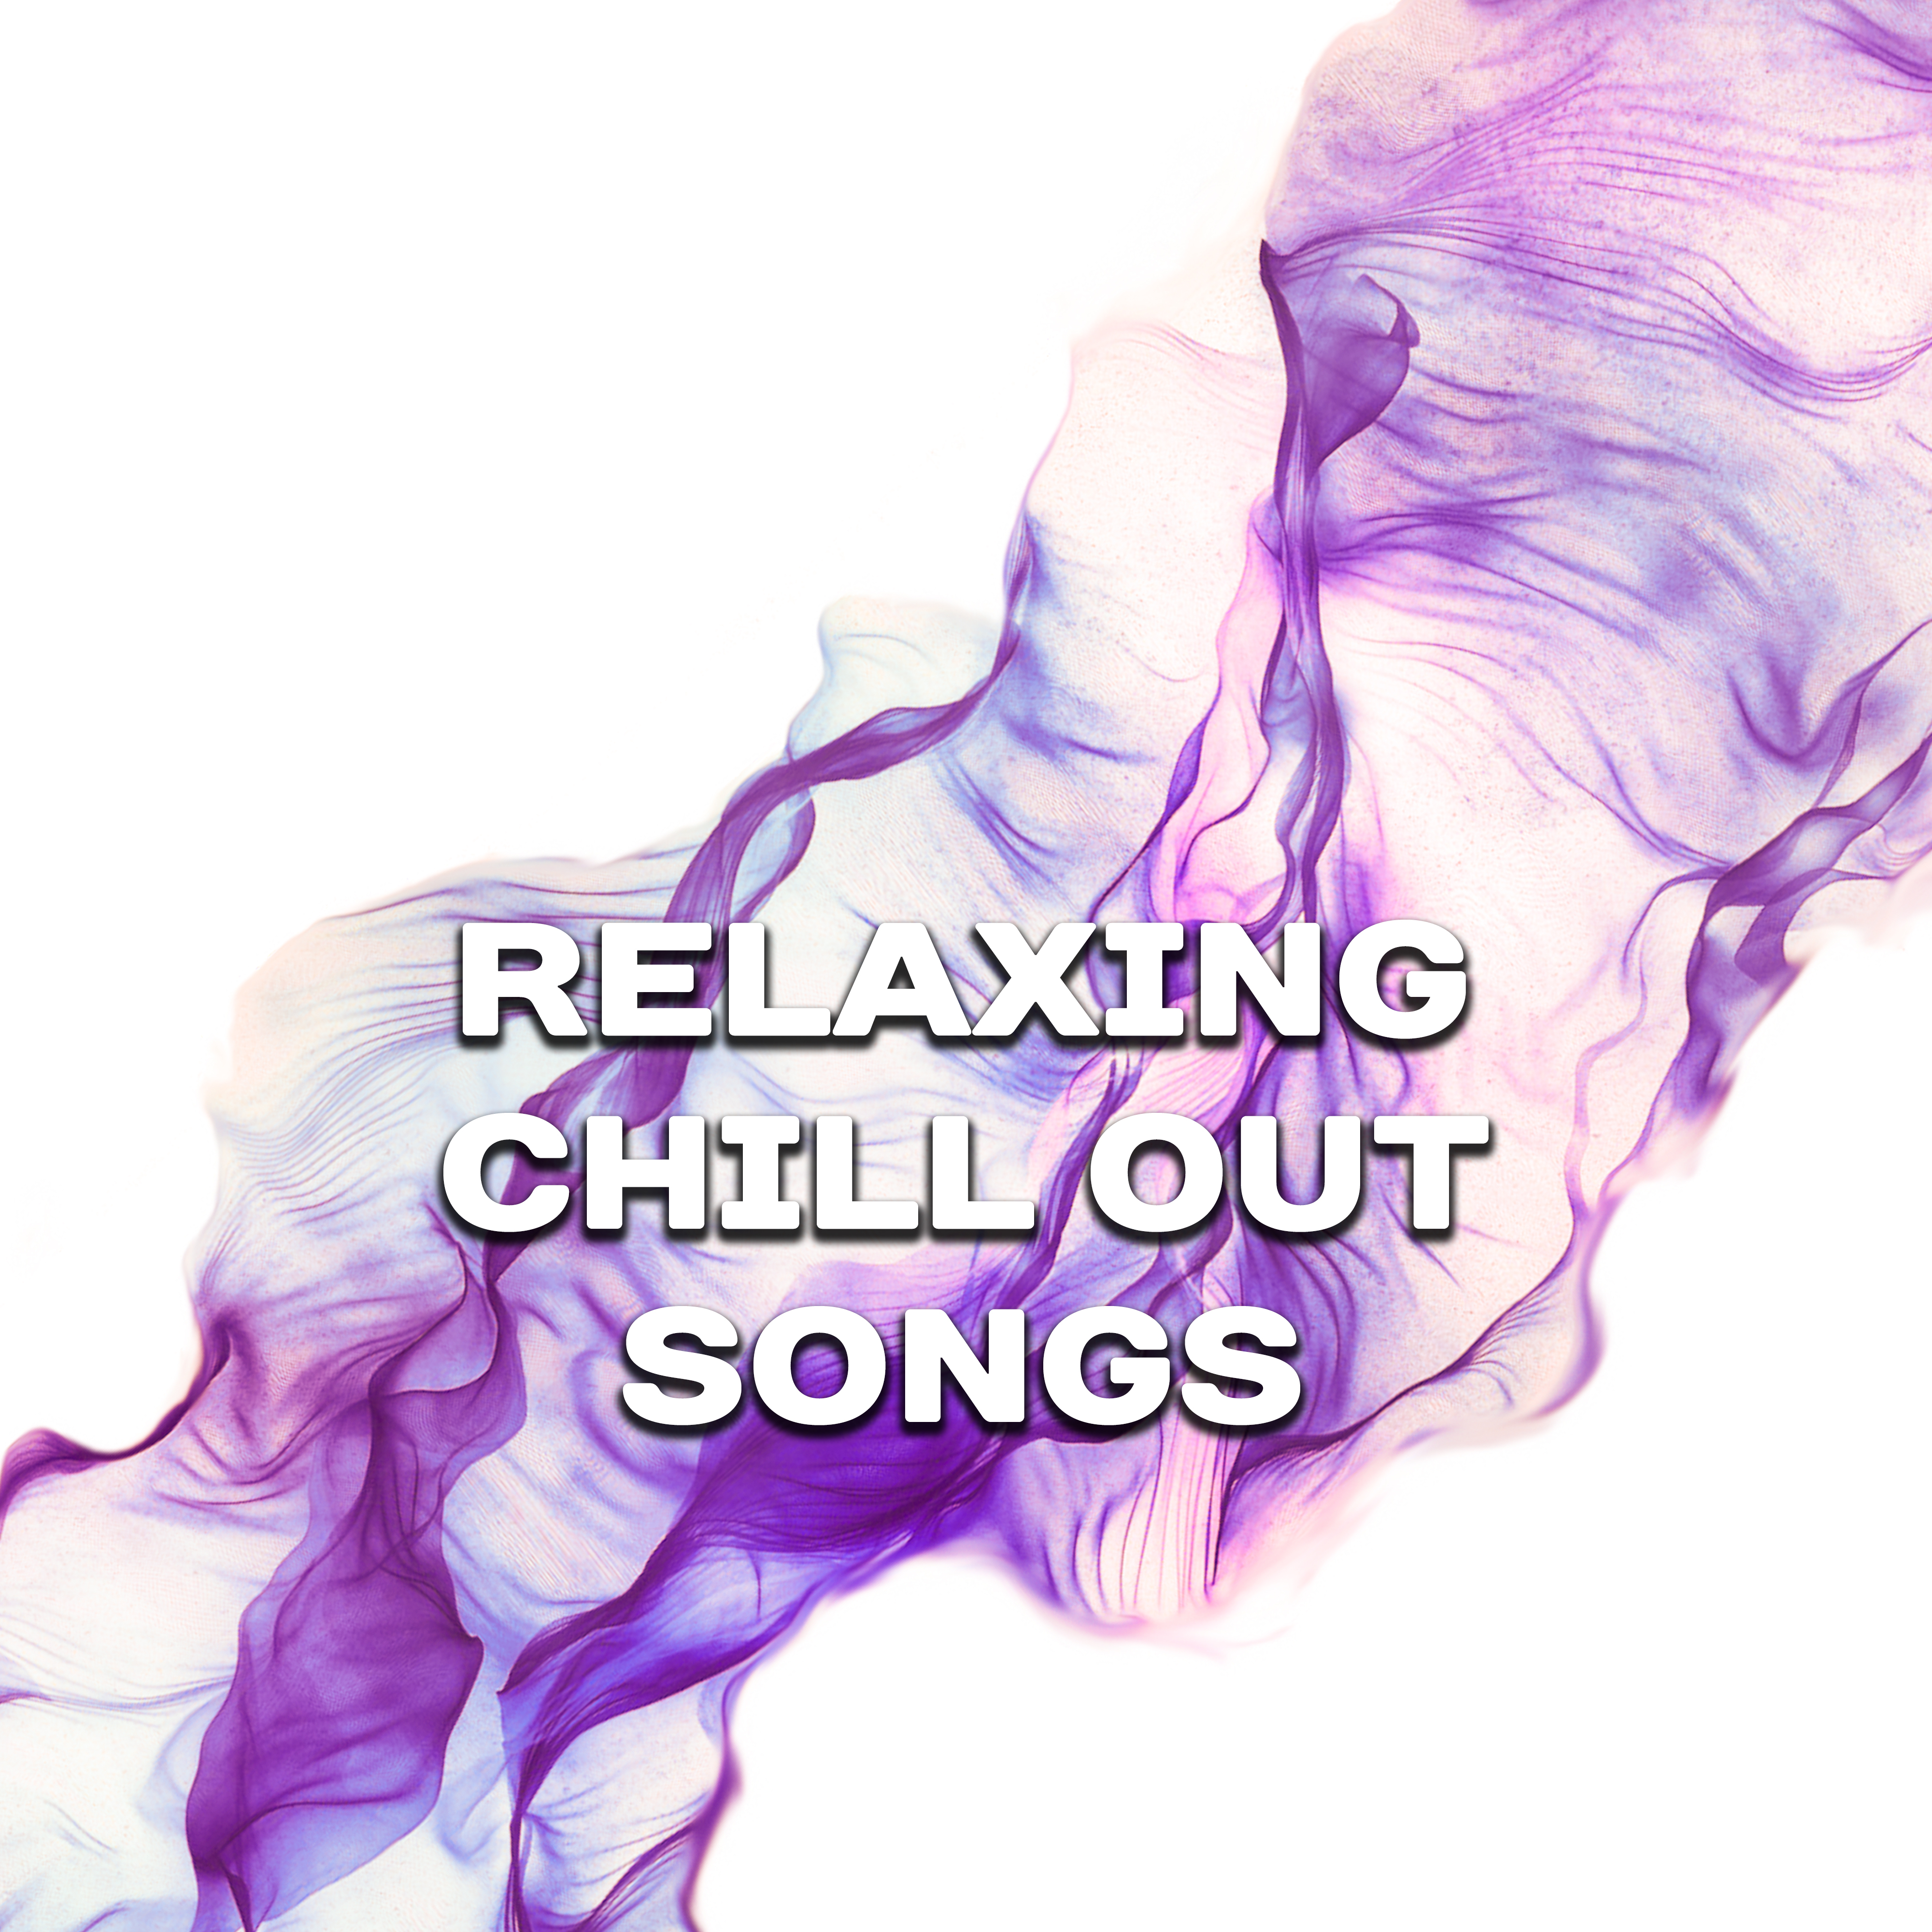 Relaxing Chill Out Songs – Soothing Rest, Chill Out Island, Relaxation Sounds to Calm Down